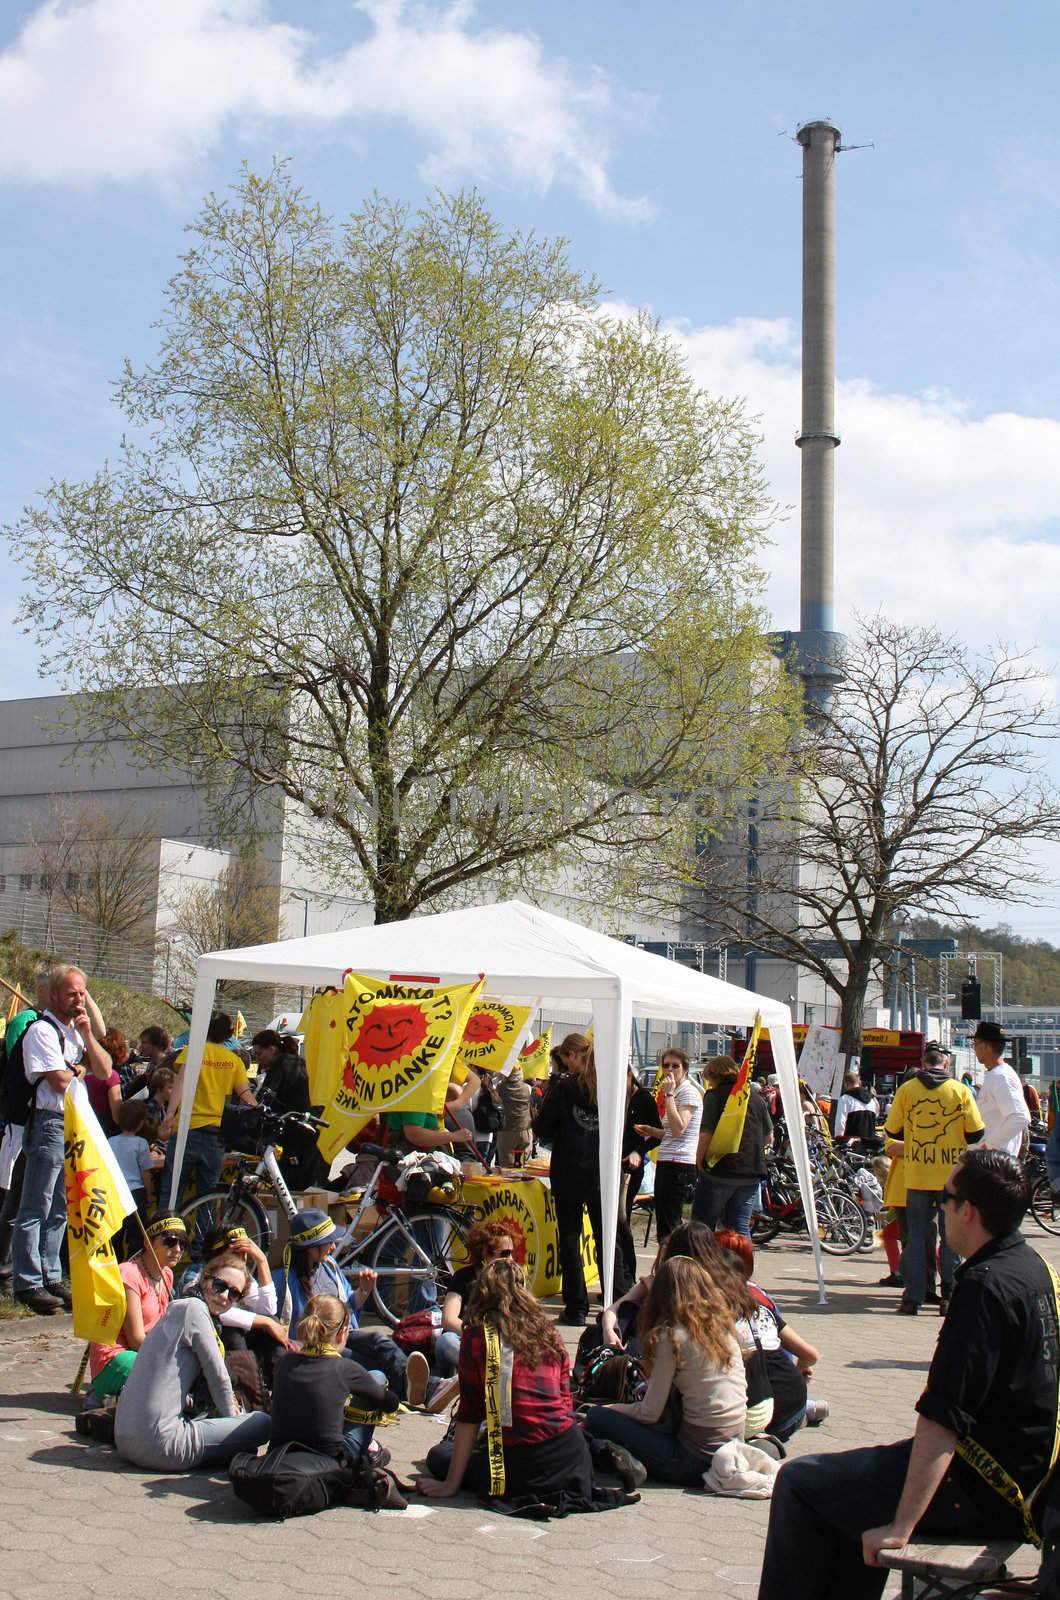 Anti-nuclear power demonstration at Krümmel Nuclear Power Station in Geesthacht, near Hamburg, Germany. 24th April 2010. Over 120000 participants!